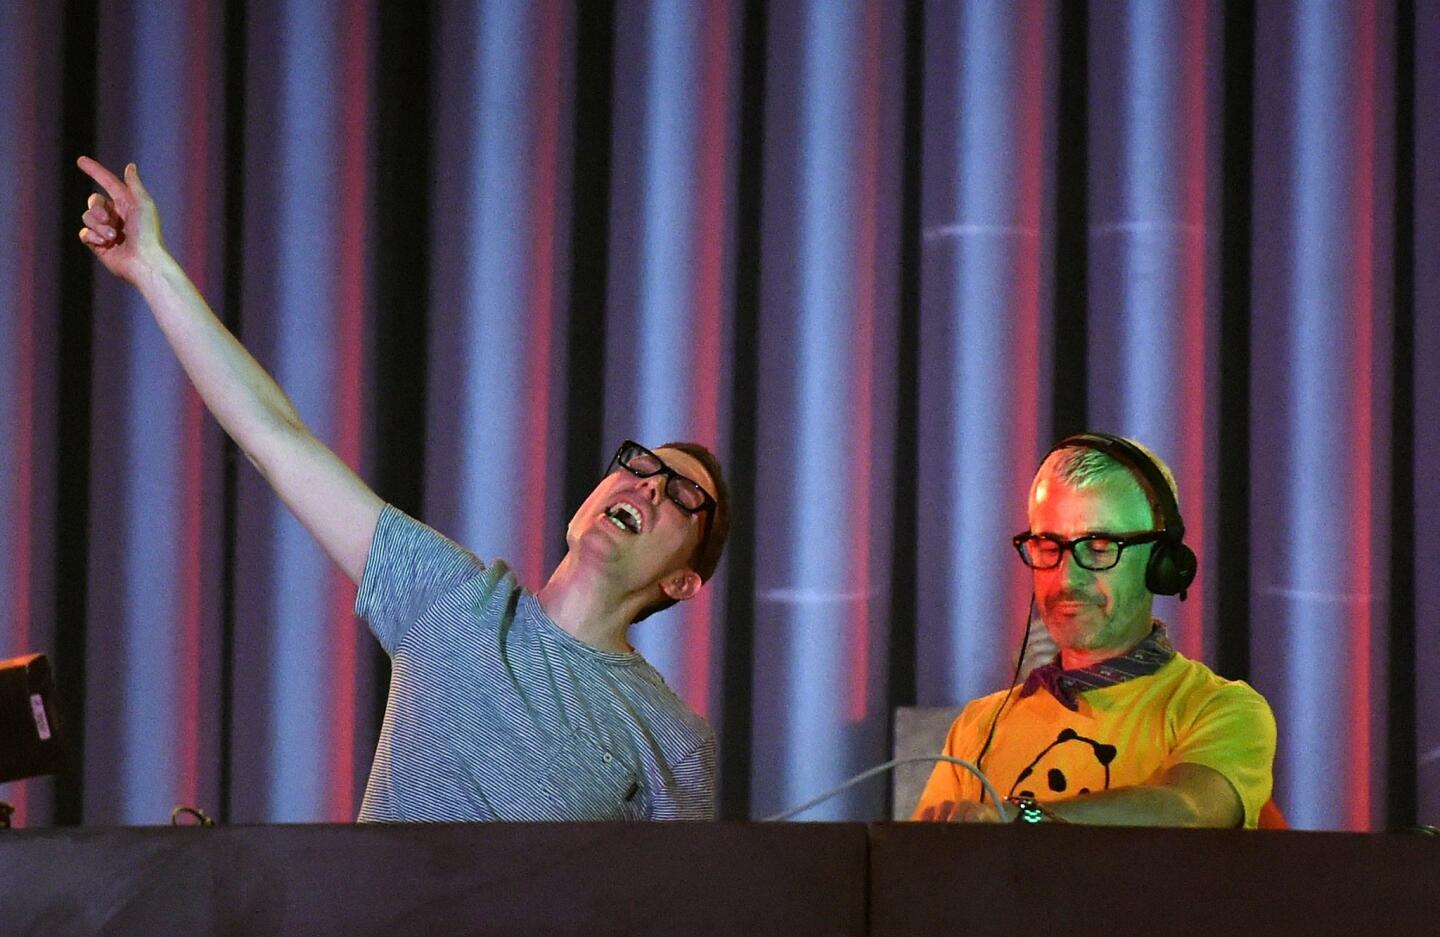 Recording artists Paavo Siljamaki, left, and Tony McGuinness of Above & Beyond perform during the 18th Electric Daisy Carnival at Las Vegas Motor Speedway.